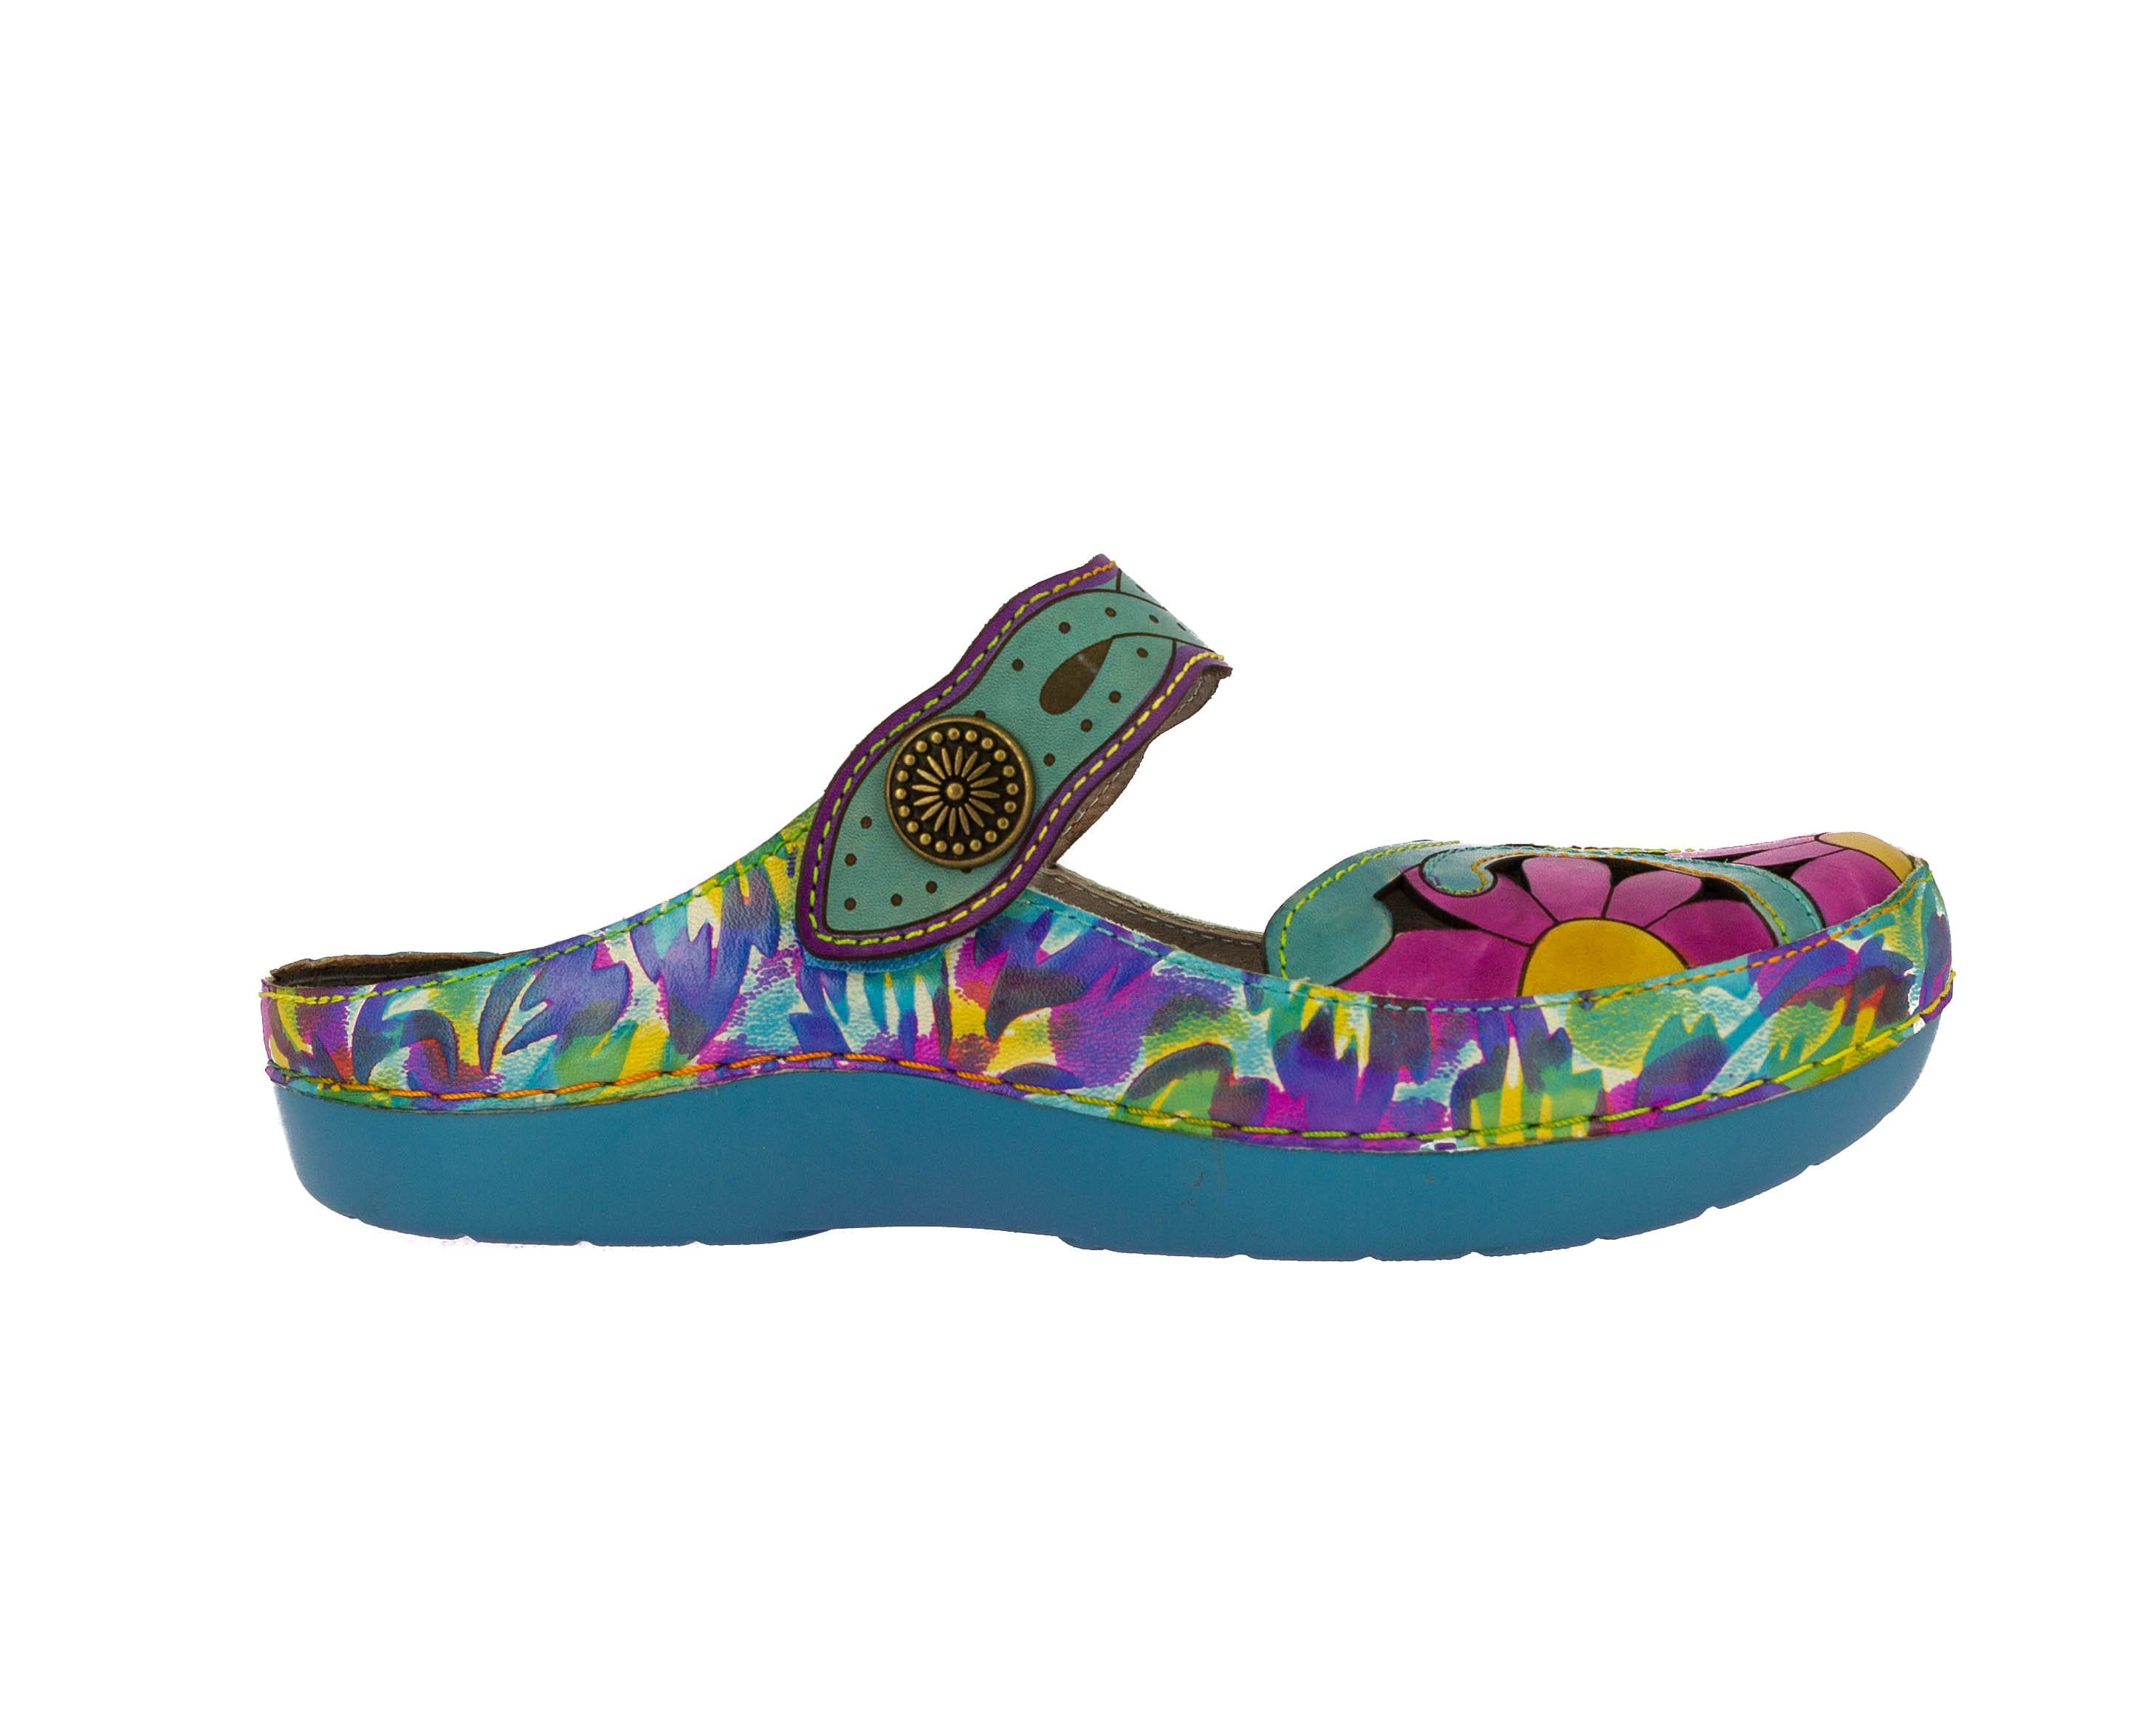 Schuhe BICLLYO 22 - 35 / TURQUOISE - Mulle